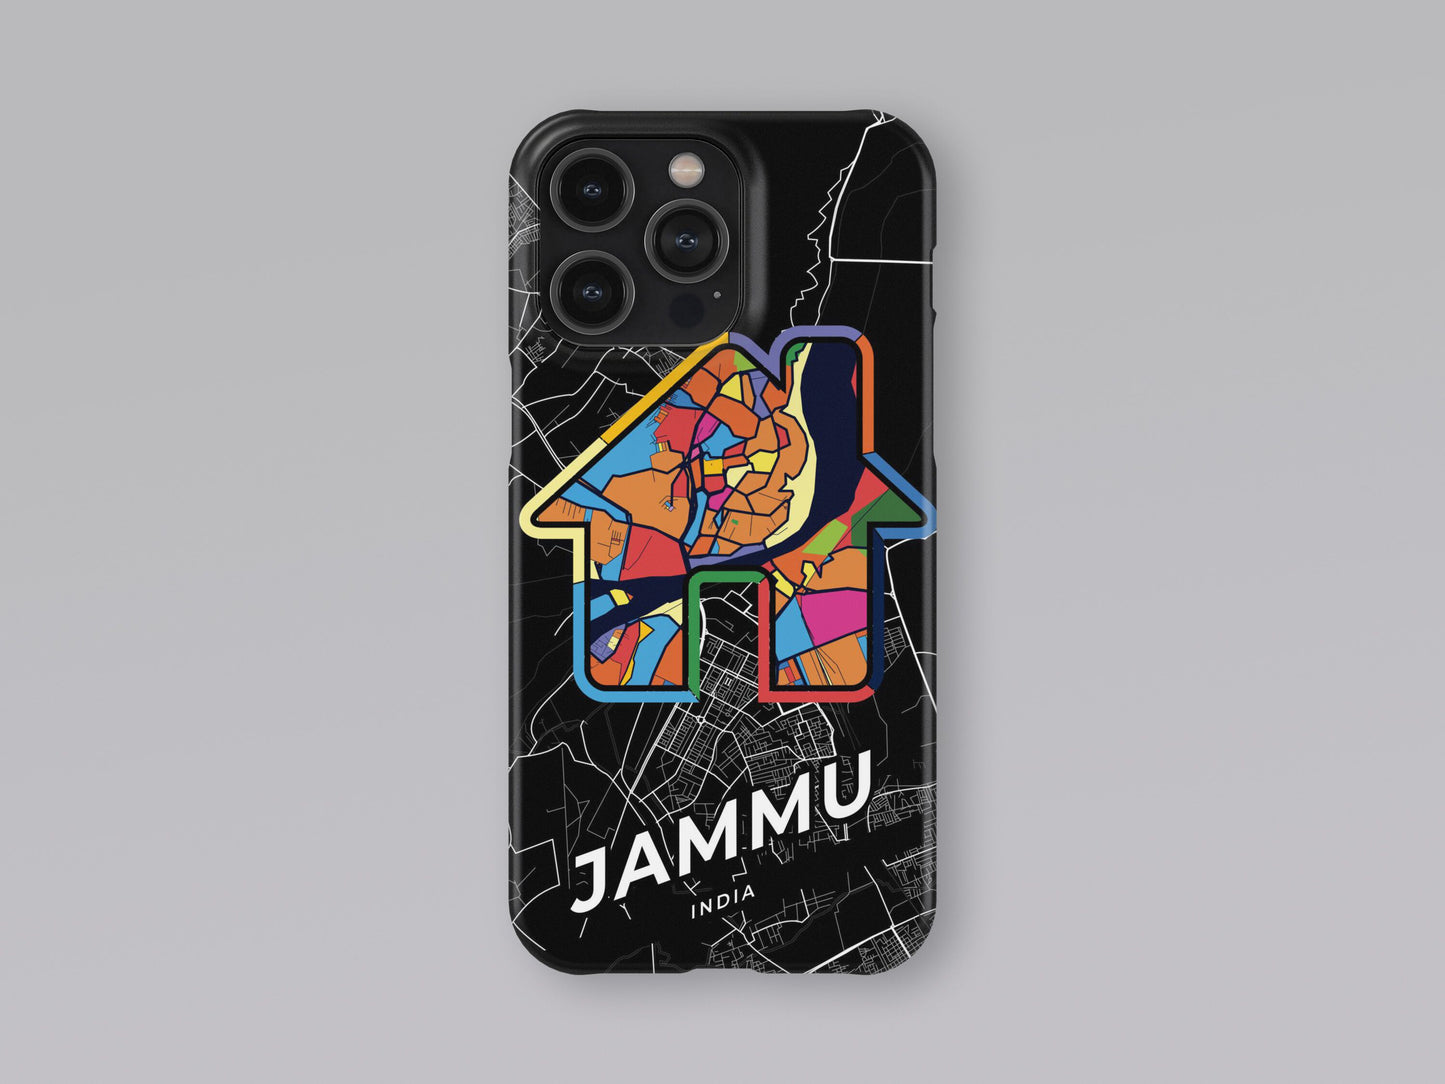 Jammu India slim phone case with colorful icon. Birthday, wedding or housewarming gift. Couple match cases. 3